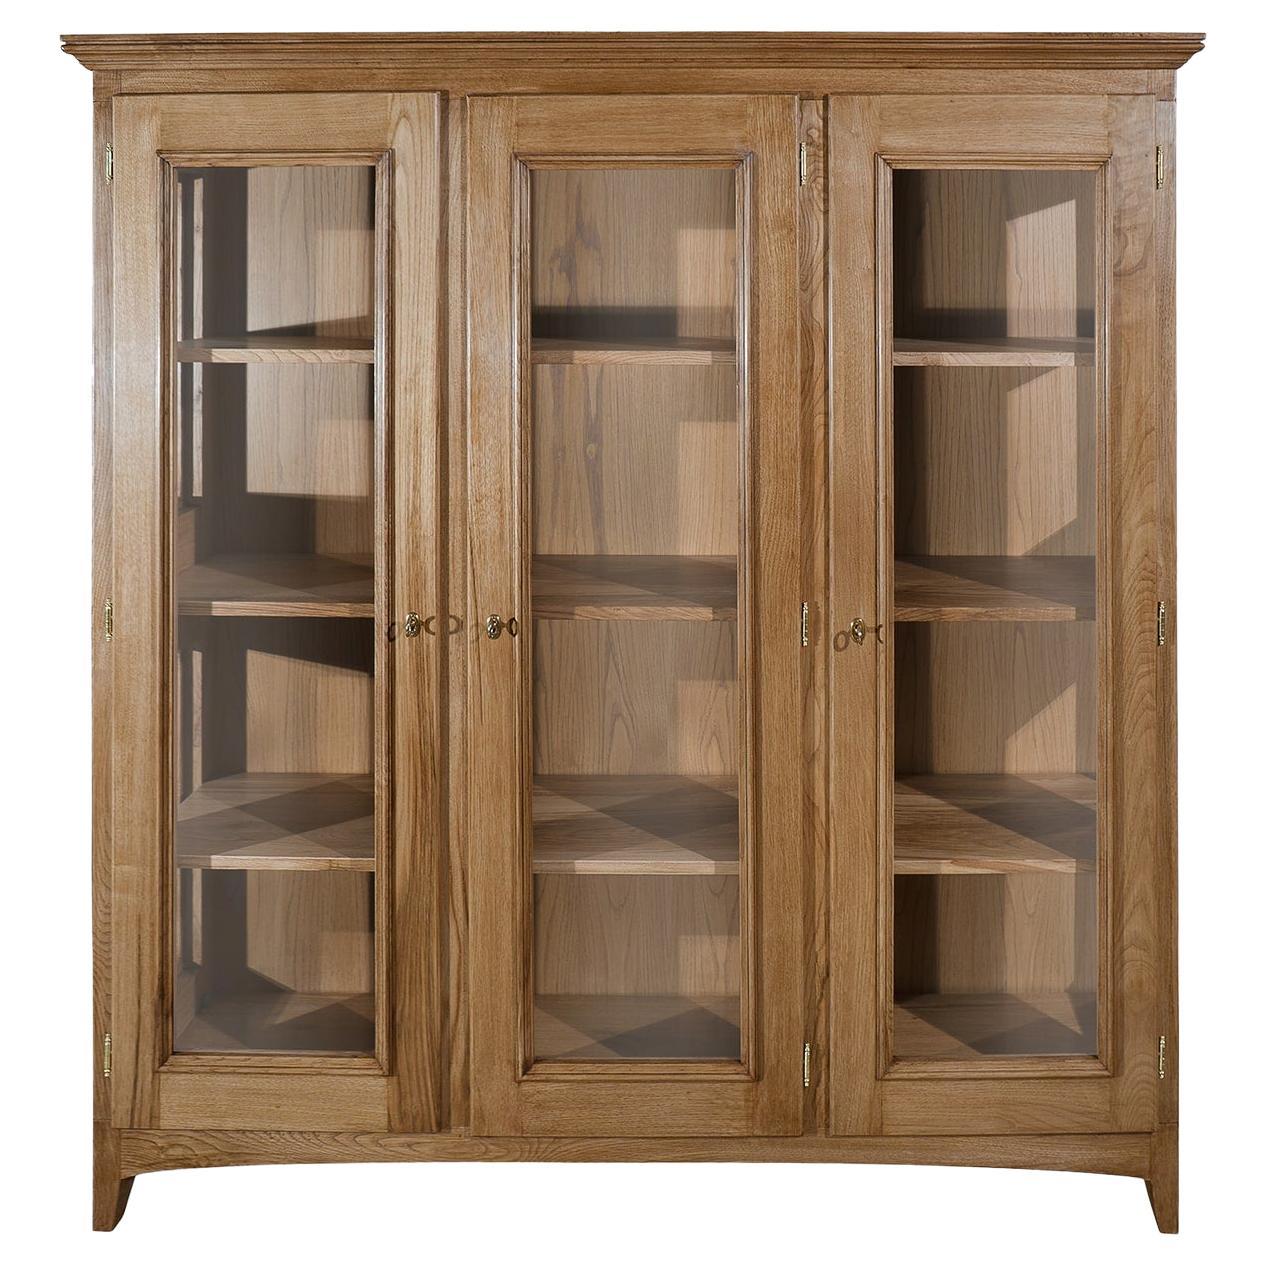 Soller Bookcase For Sale